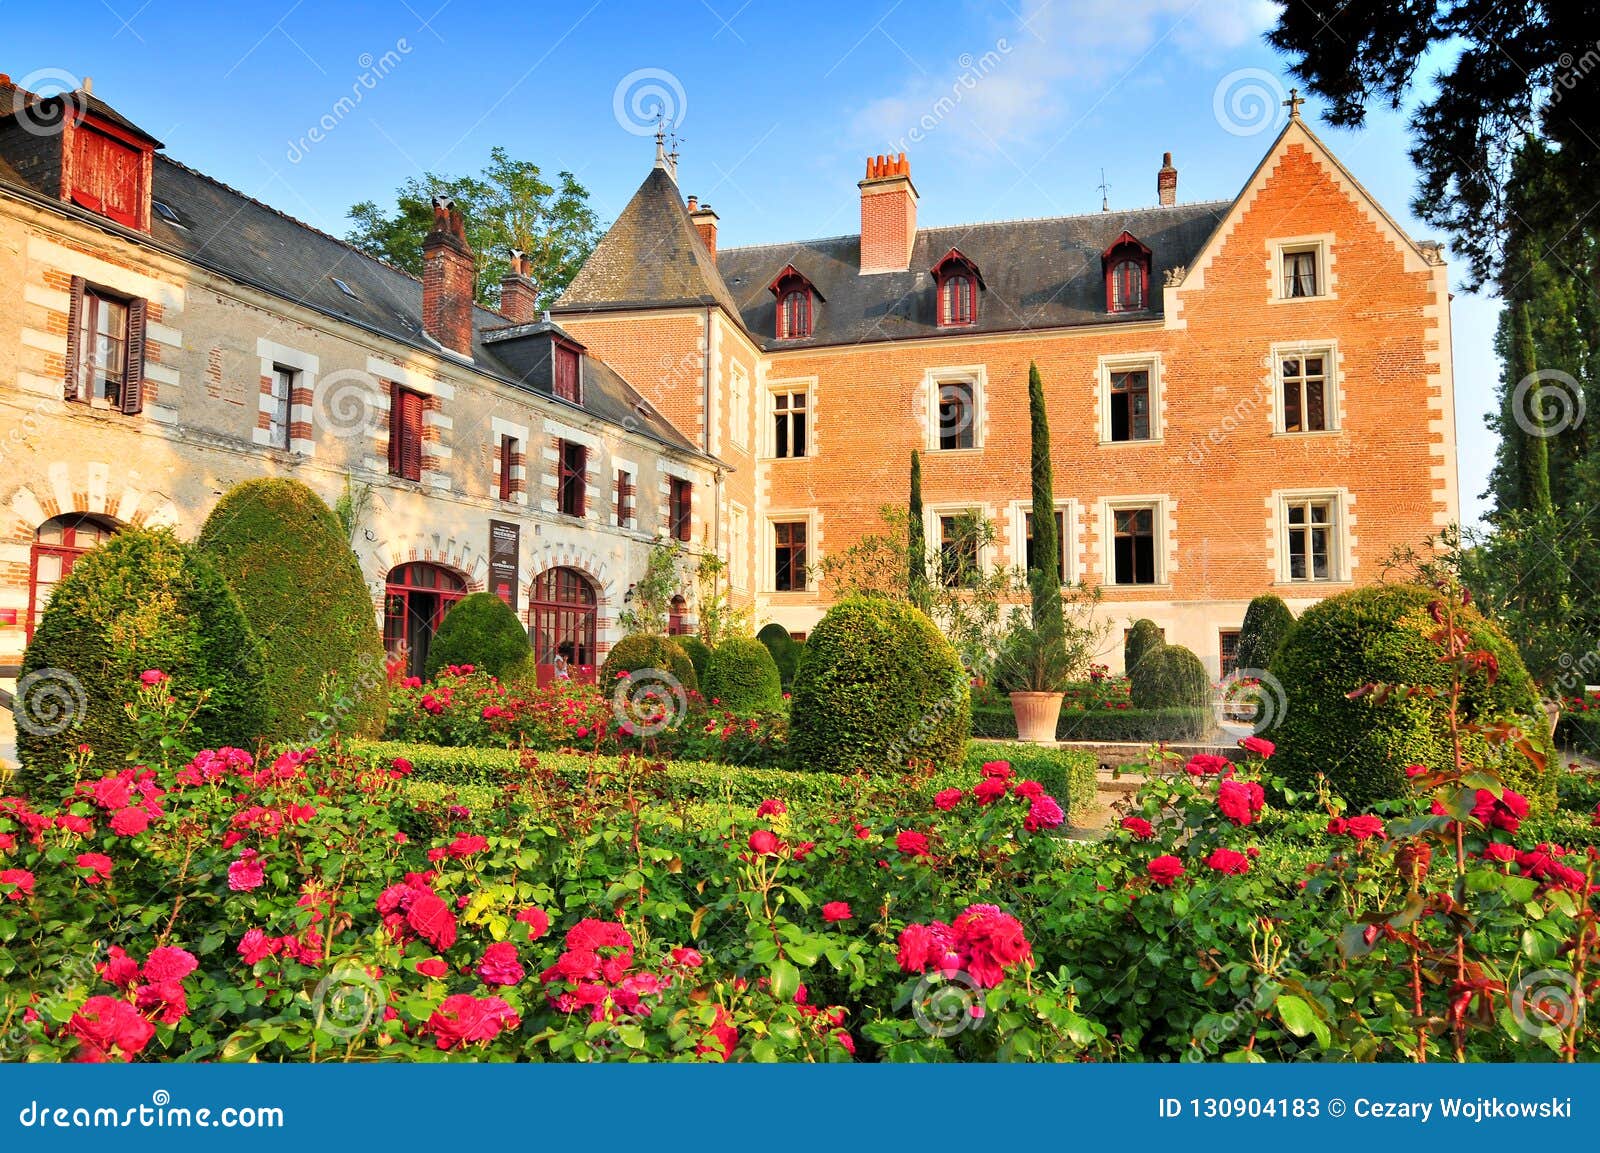 clos luce mansion in amboise. leonardo da vinci lived here for the last three years of his life and died, france.